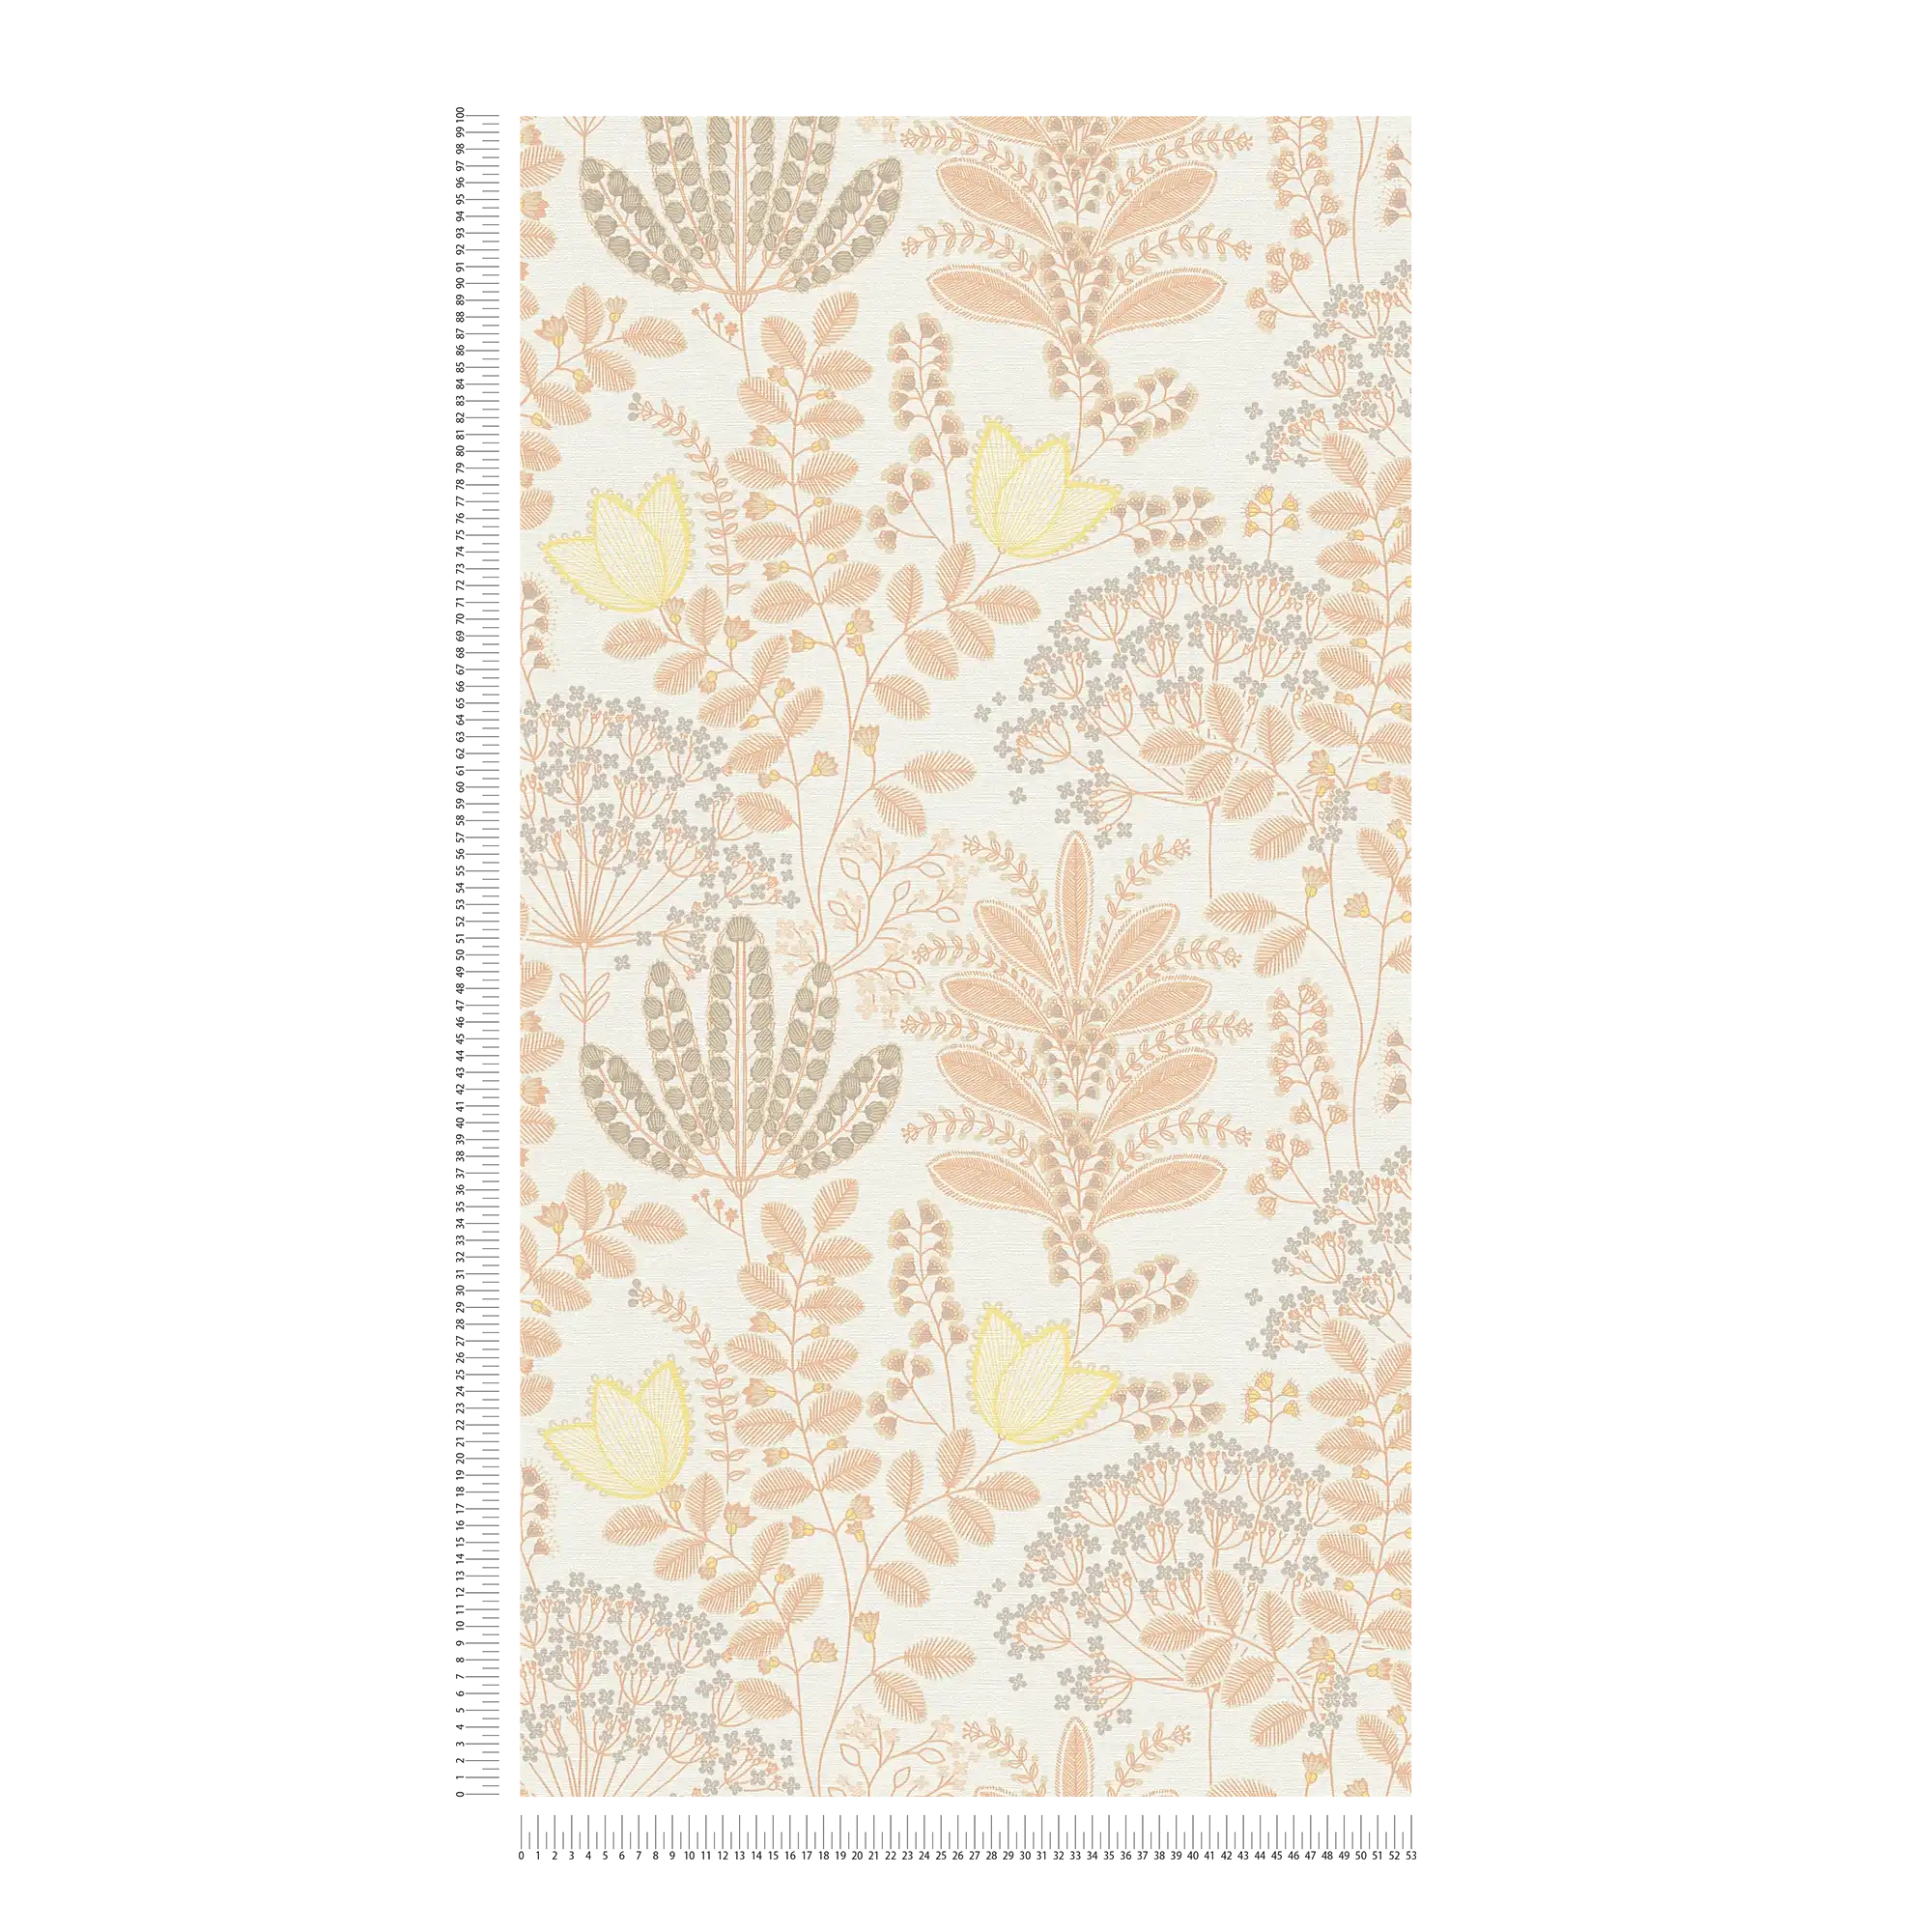             Floral wallpaper with leaves in retro style slightly textured, matt - white, orange, yellow
        